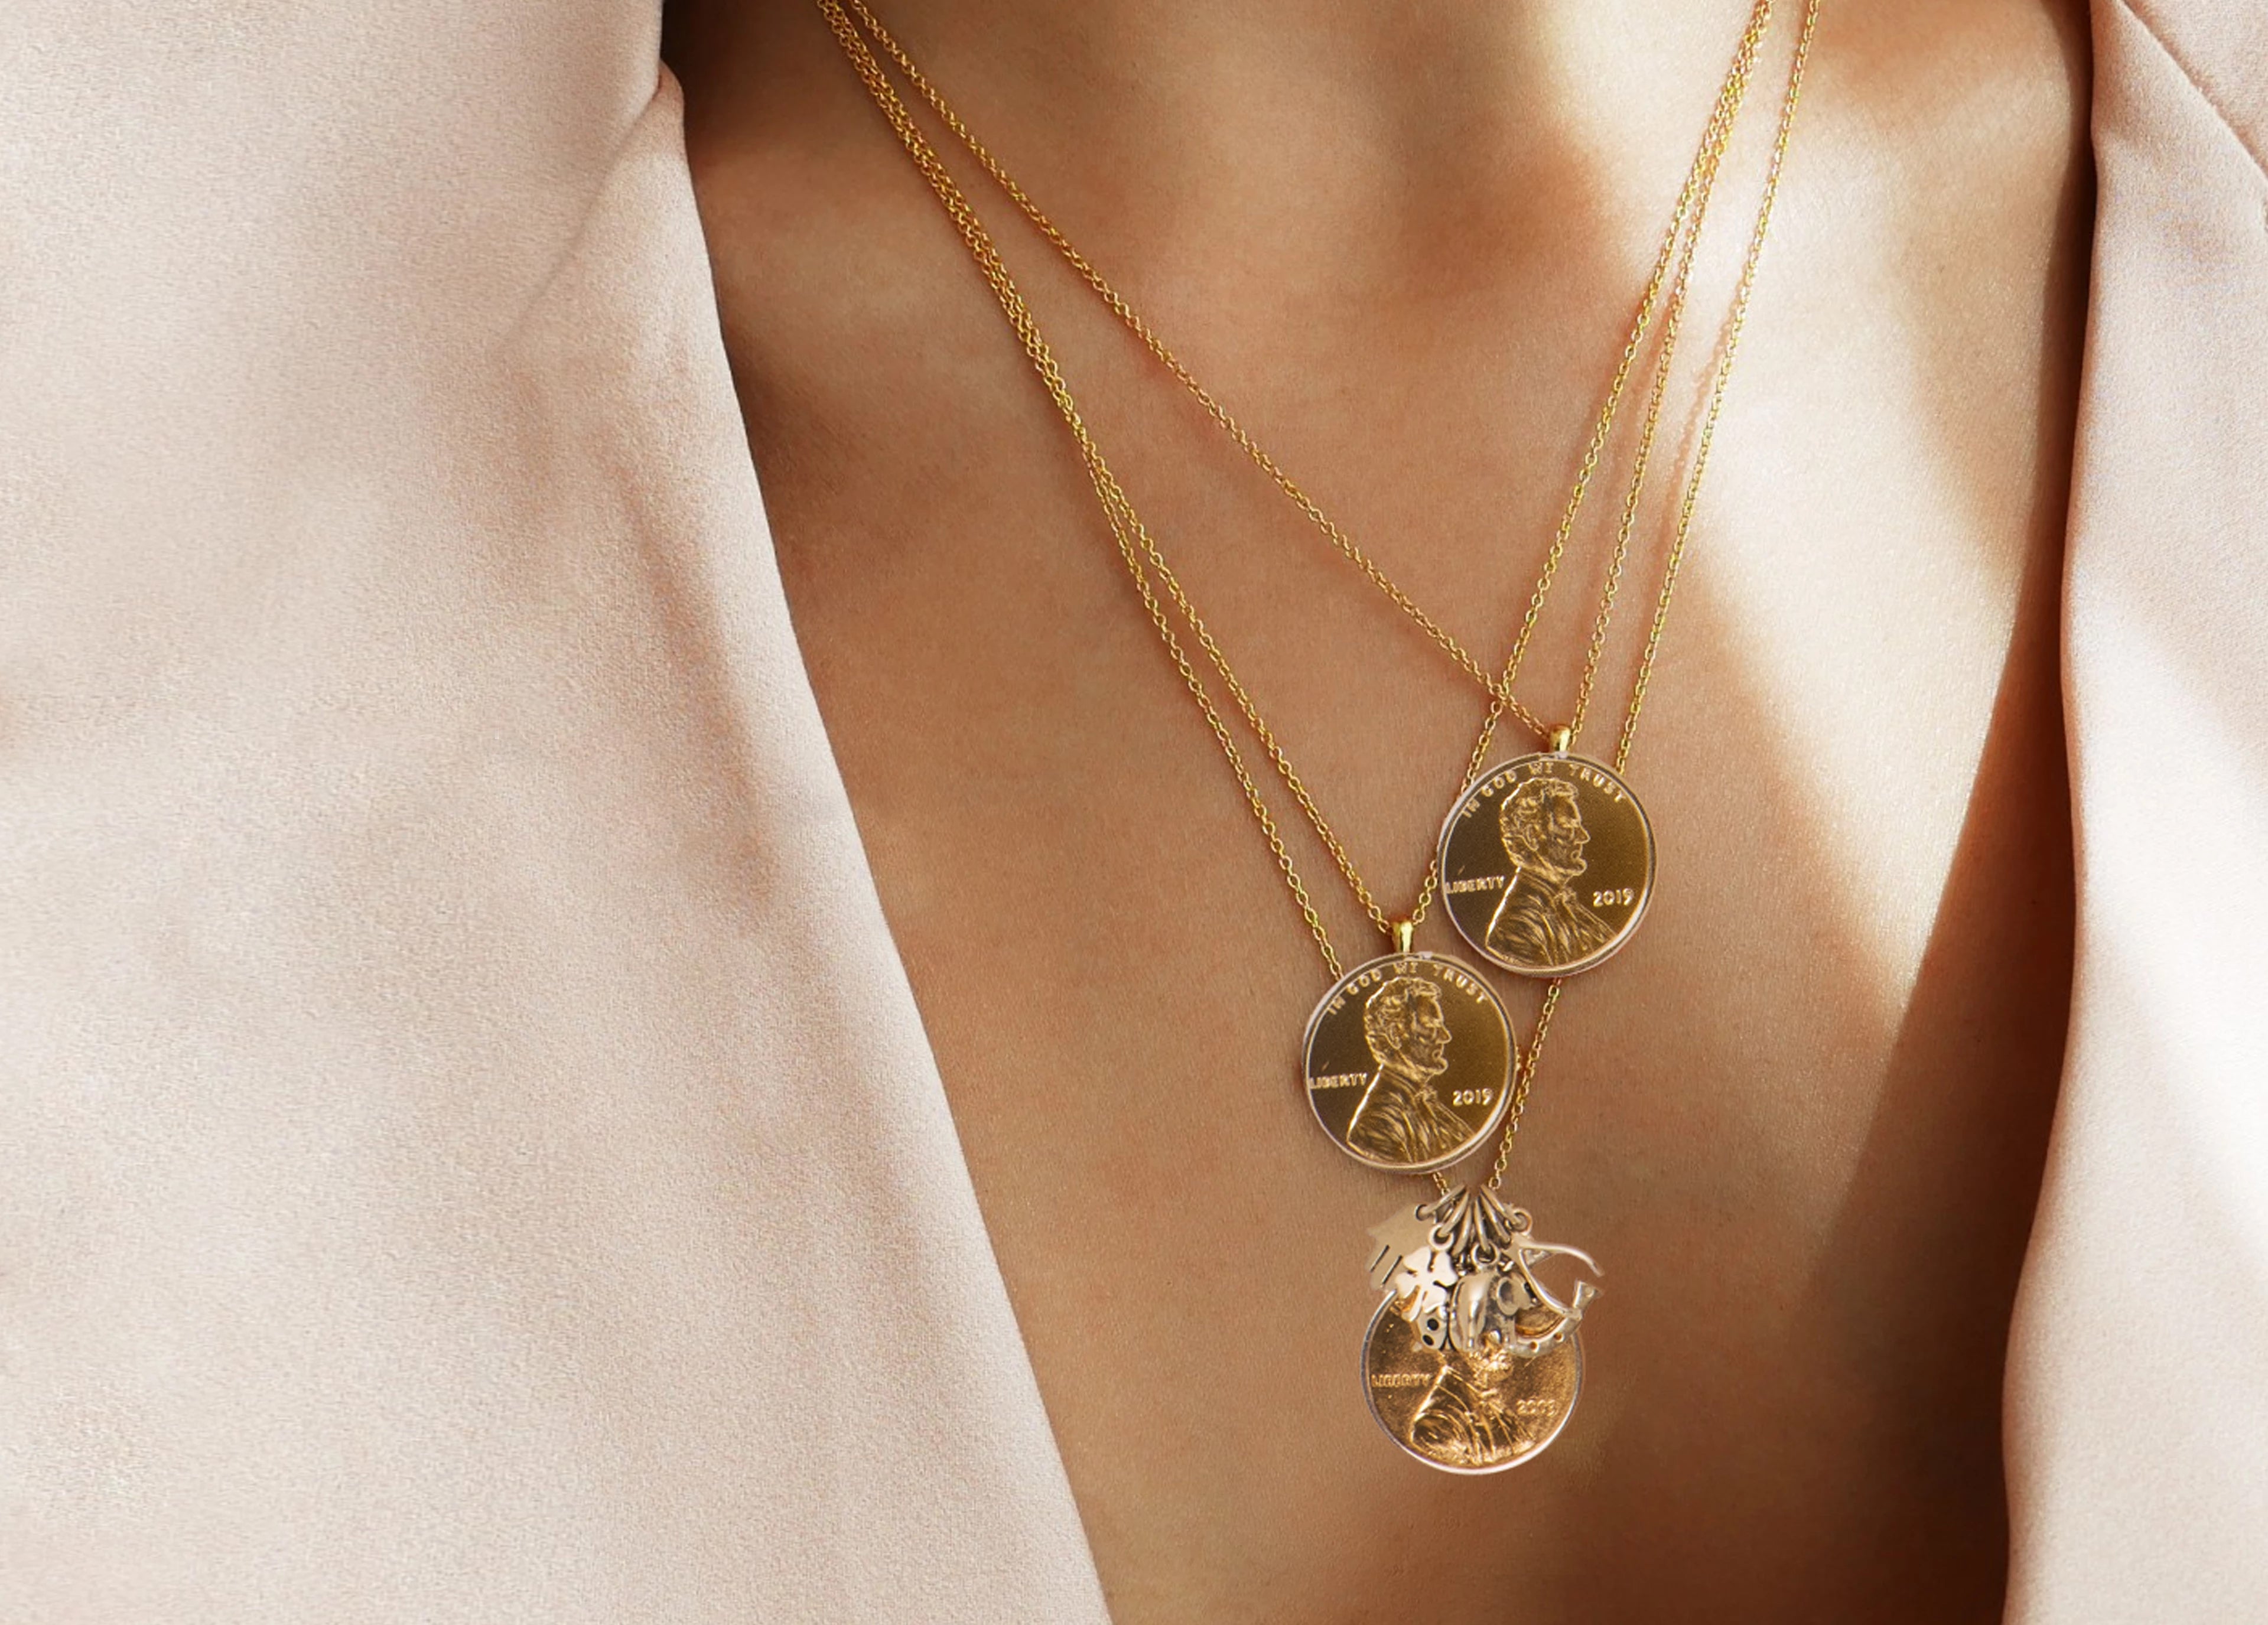 CUSTOMIZABLE “So Lucky” Necklace w/ 7 Good Luck Charms